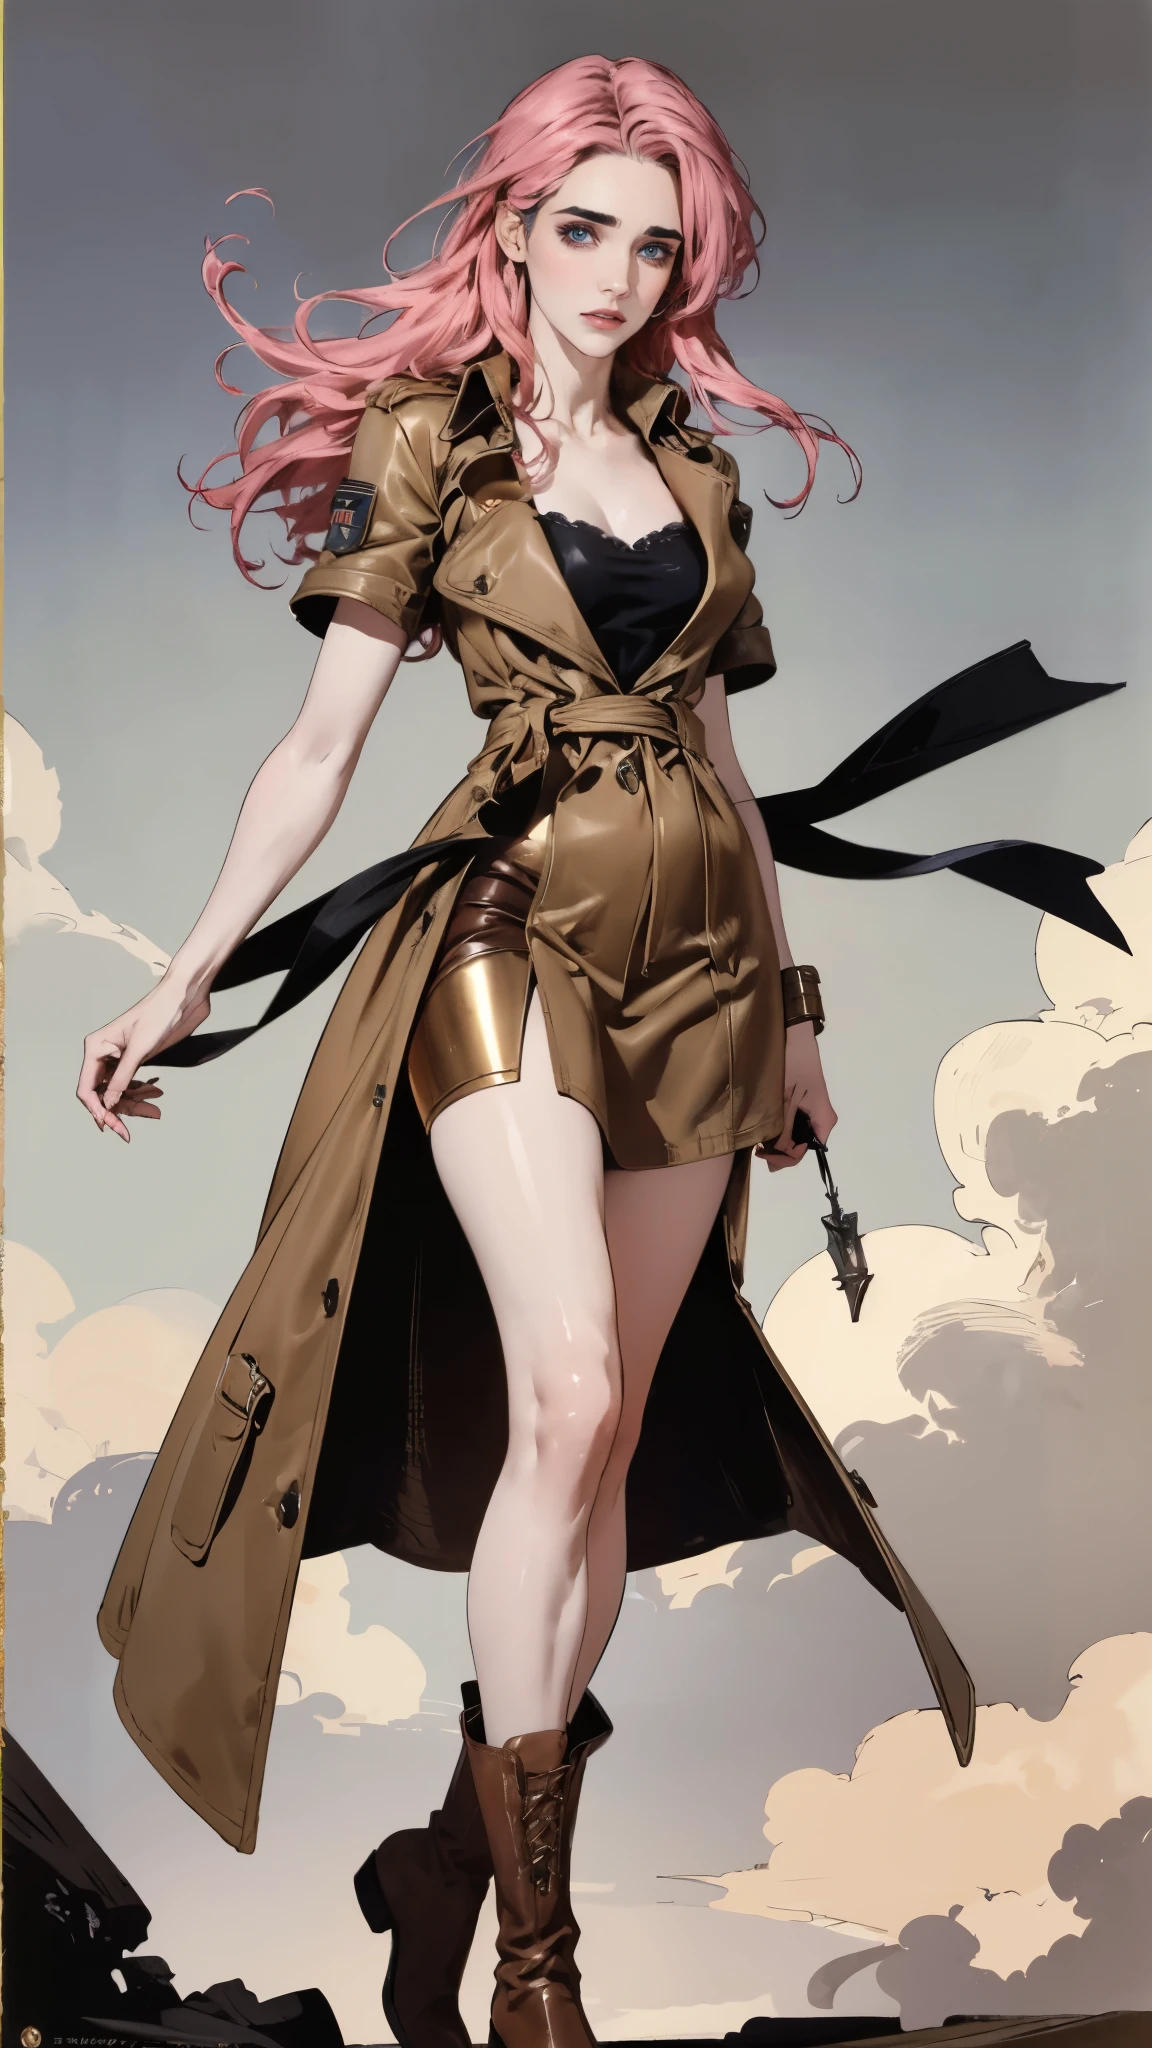 (A beautiful young girl with long curly pink hair, slender eyebrows, sparkling eyes, a bewildered expression, an oval-shapedl face with pale skin, a knee-length form-fitting leather trench coat with very short sleeves, she adorns both hands with metallic wrist guards in a sci-fi ancient civilization style, her long legs are clad in leather boots as she soars through the misty clouds), this character embodies a finely crafted fantasy-realism style western ranger in anime style, exquisite and mature manga art style, porcelain skin, perfect skin, perfect eyes, (Jennifer Connelly:1.2), high definition, best quality, highres, ultra-detailed, ultra-fine painting, extremely delicate, professional, anatomically correct, symmetrical face, extremely detailed eyes and face, high quality eyes, creativity, RAW photo, UHD, 32k, Natural light, cinematic lighting, masterpiece-anatomy-perfect, masterpiece:1.5